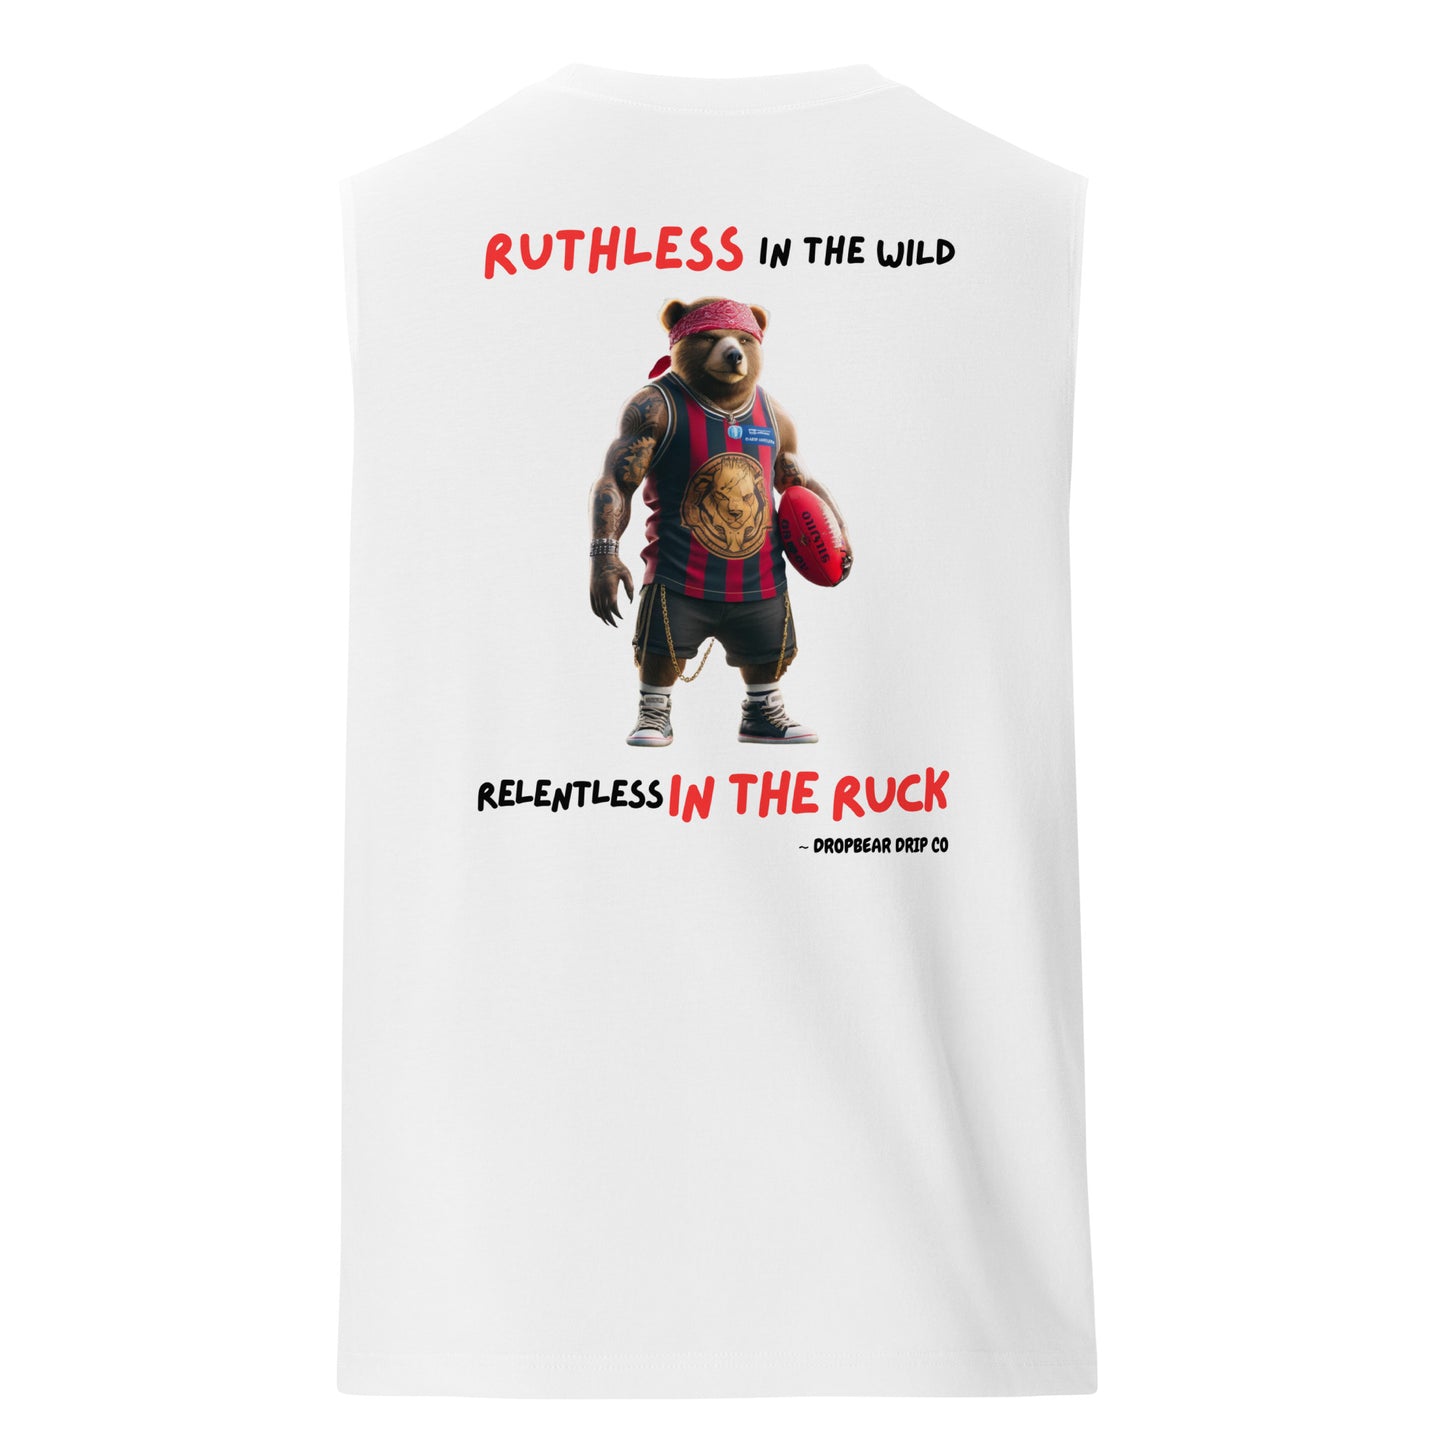 Ruthless in the Wild, Relentless in the Ruck (AFL Edition) - Men's Muscle Shirt